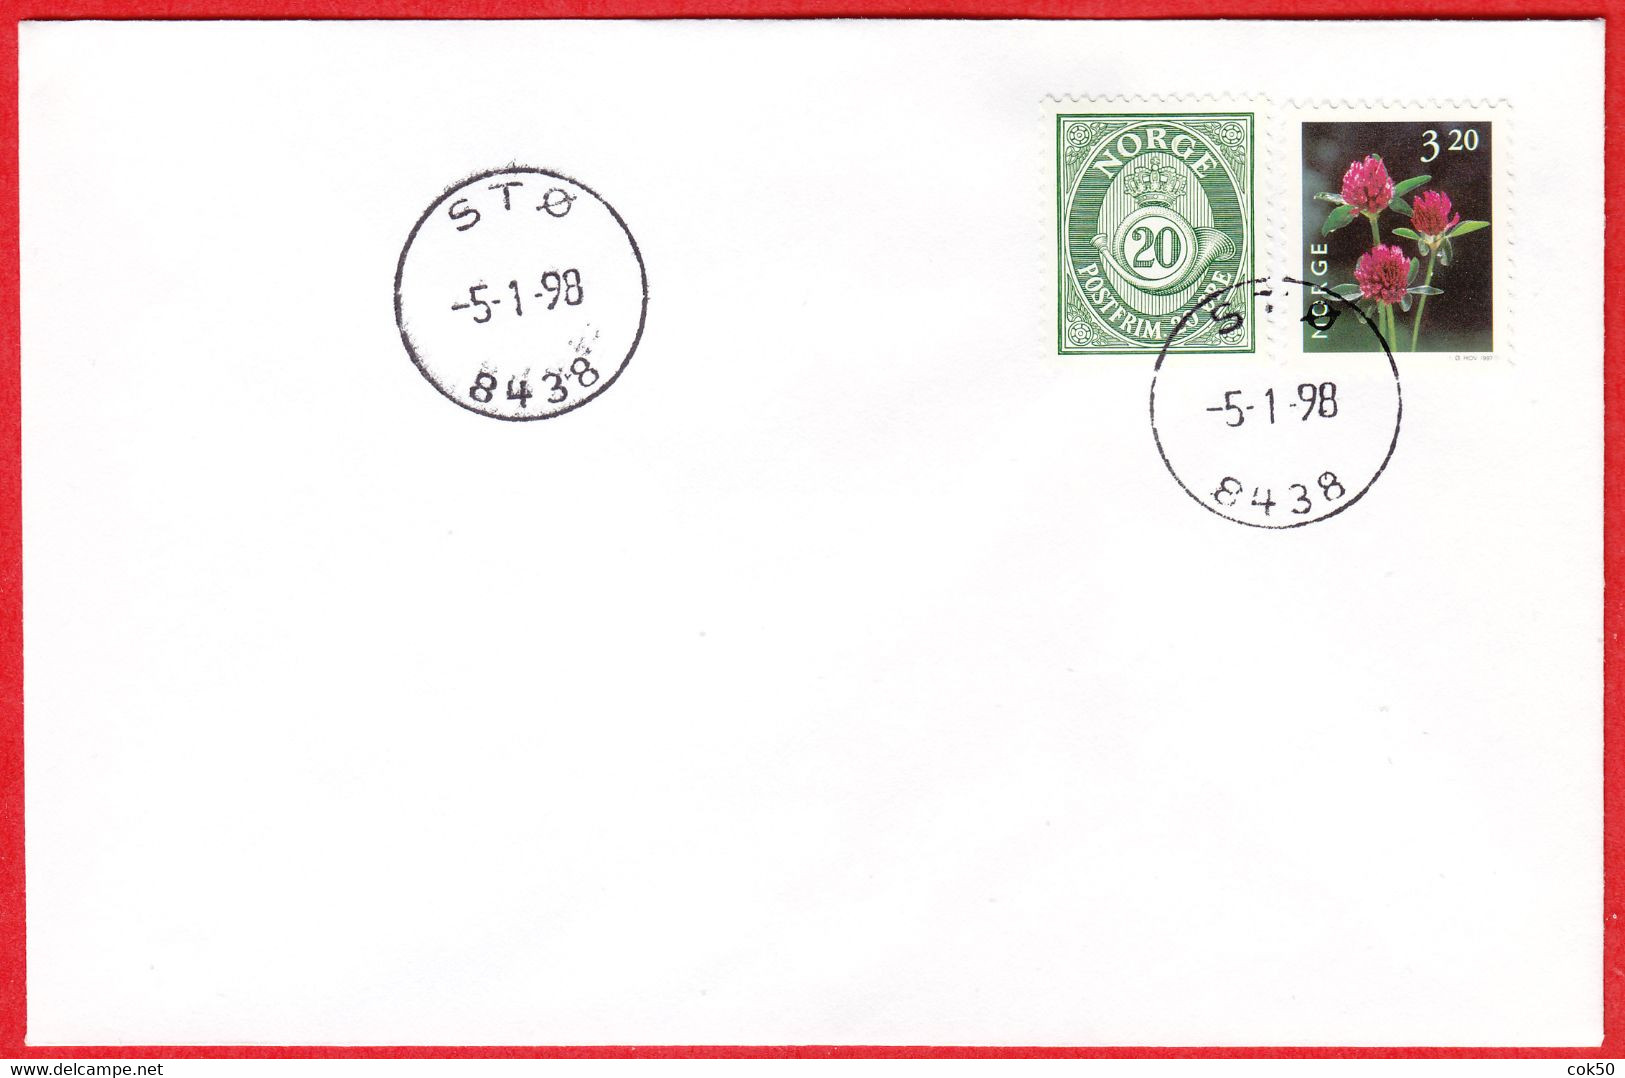 NORWAY -  8438 STØ (Nordland County) - Last Day/postoffice Closed On 1998.01.05 - Lokale Uitgaven